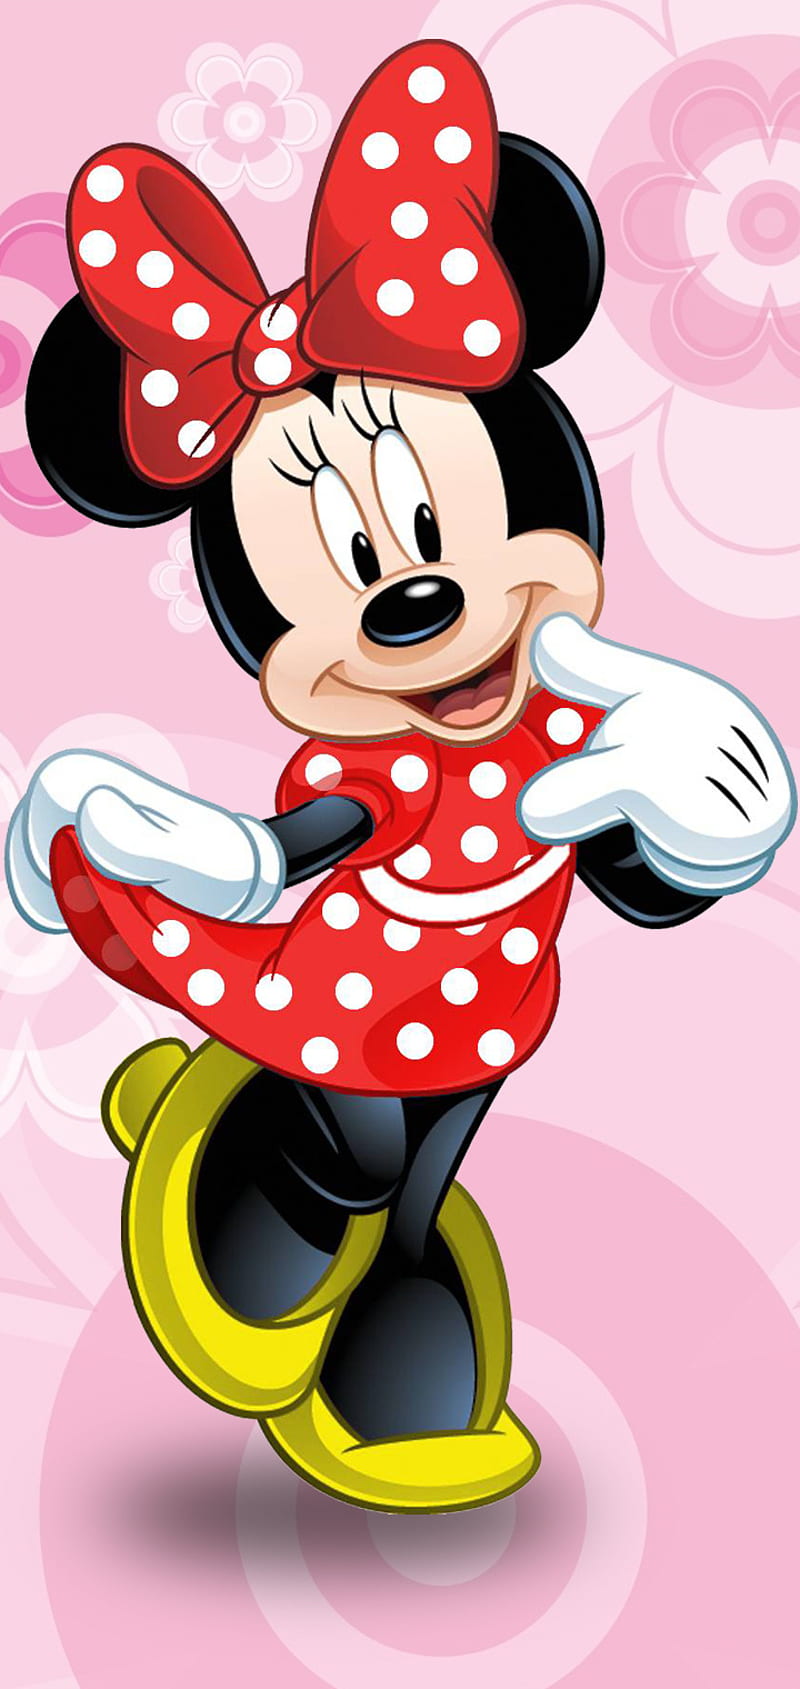 Details 63+ minnie mouse phone wallpaper latest - in.cdgdbentre